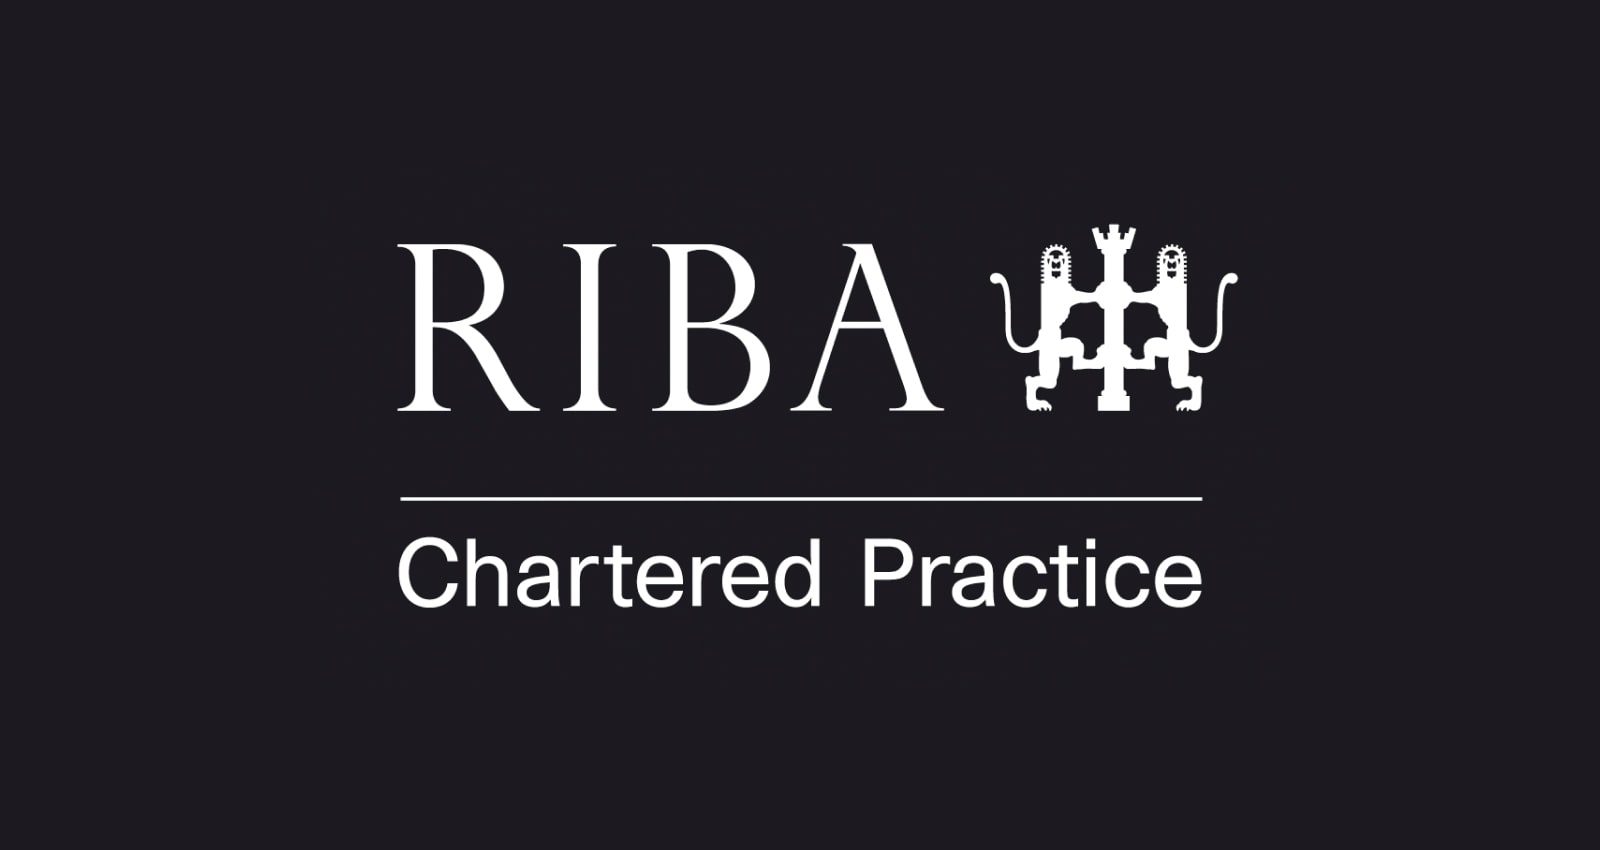 MJ Medical achieves RIBA Chartered Practice registration